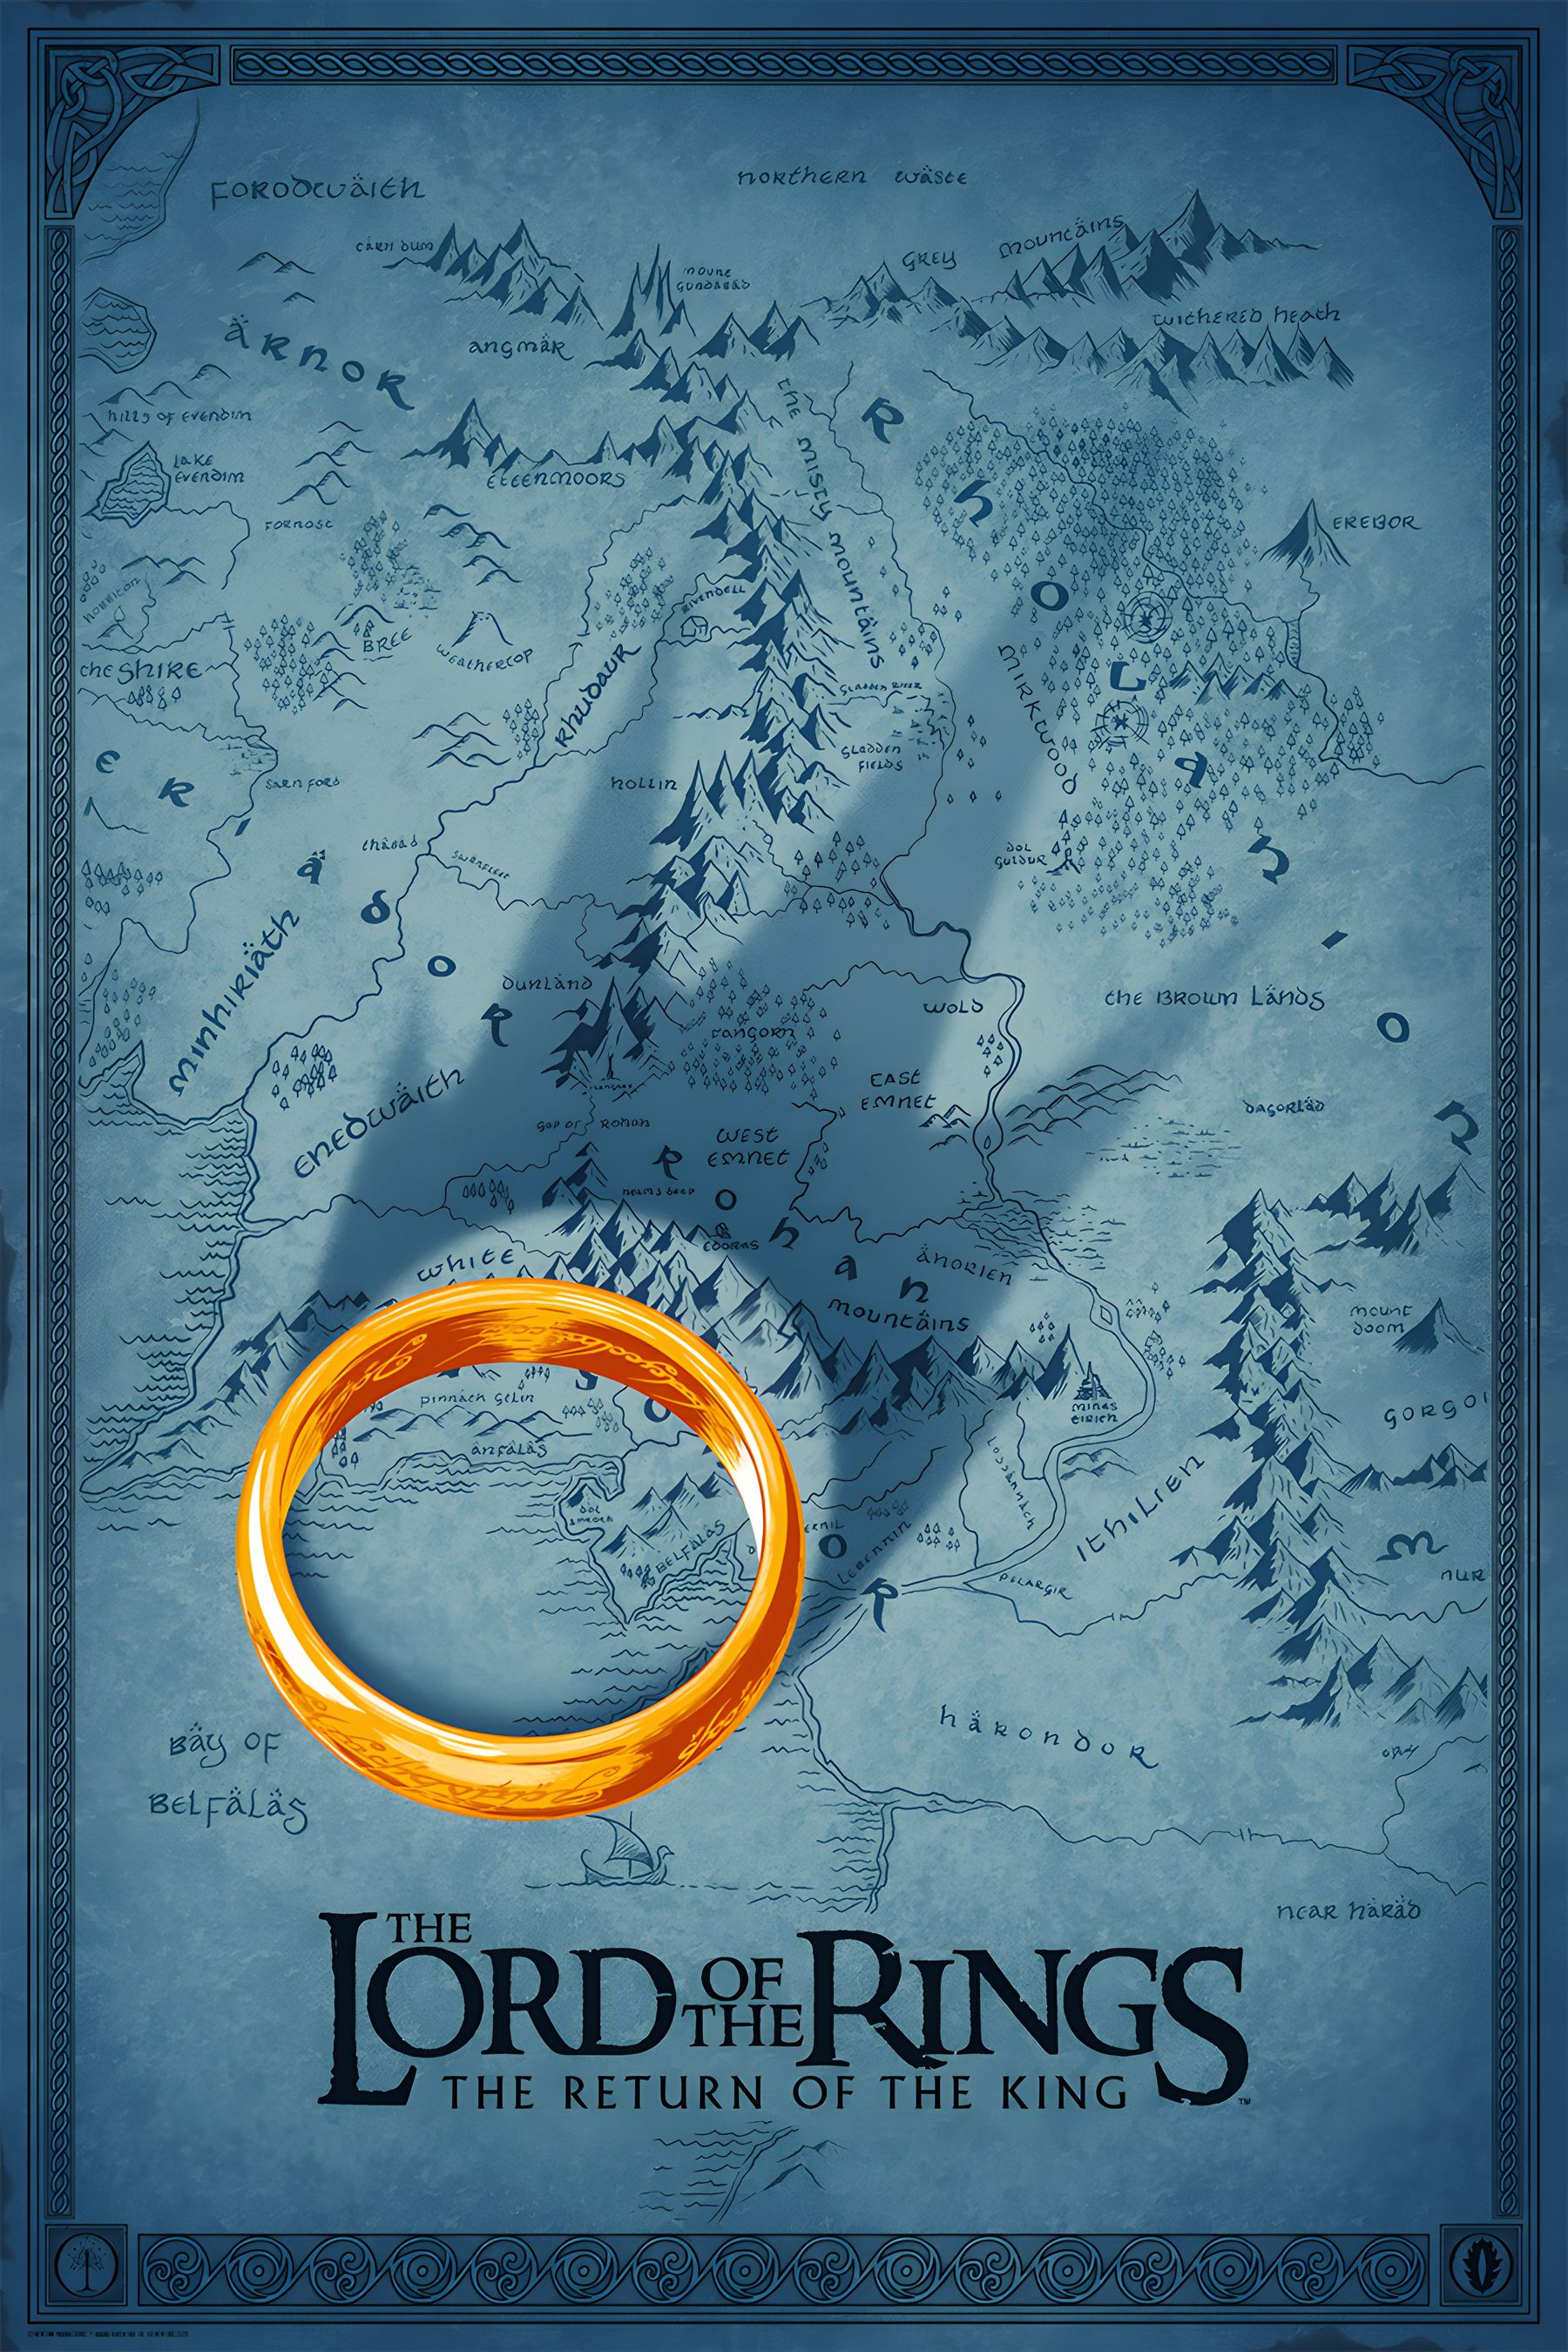 General 1800x2700 The Lord of the Rings J. R. R. Tolkien The Lord of the Rings: The Return of the King artwork portrait display upscaled map The One Ring shadow crown Middle-Earth